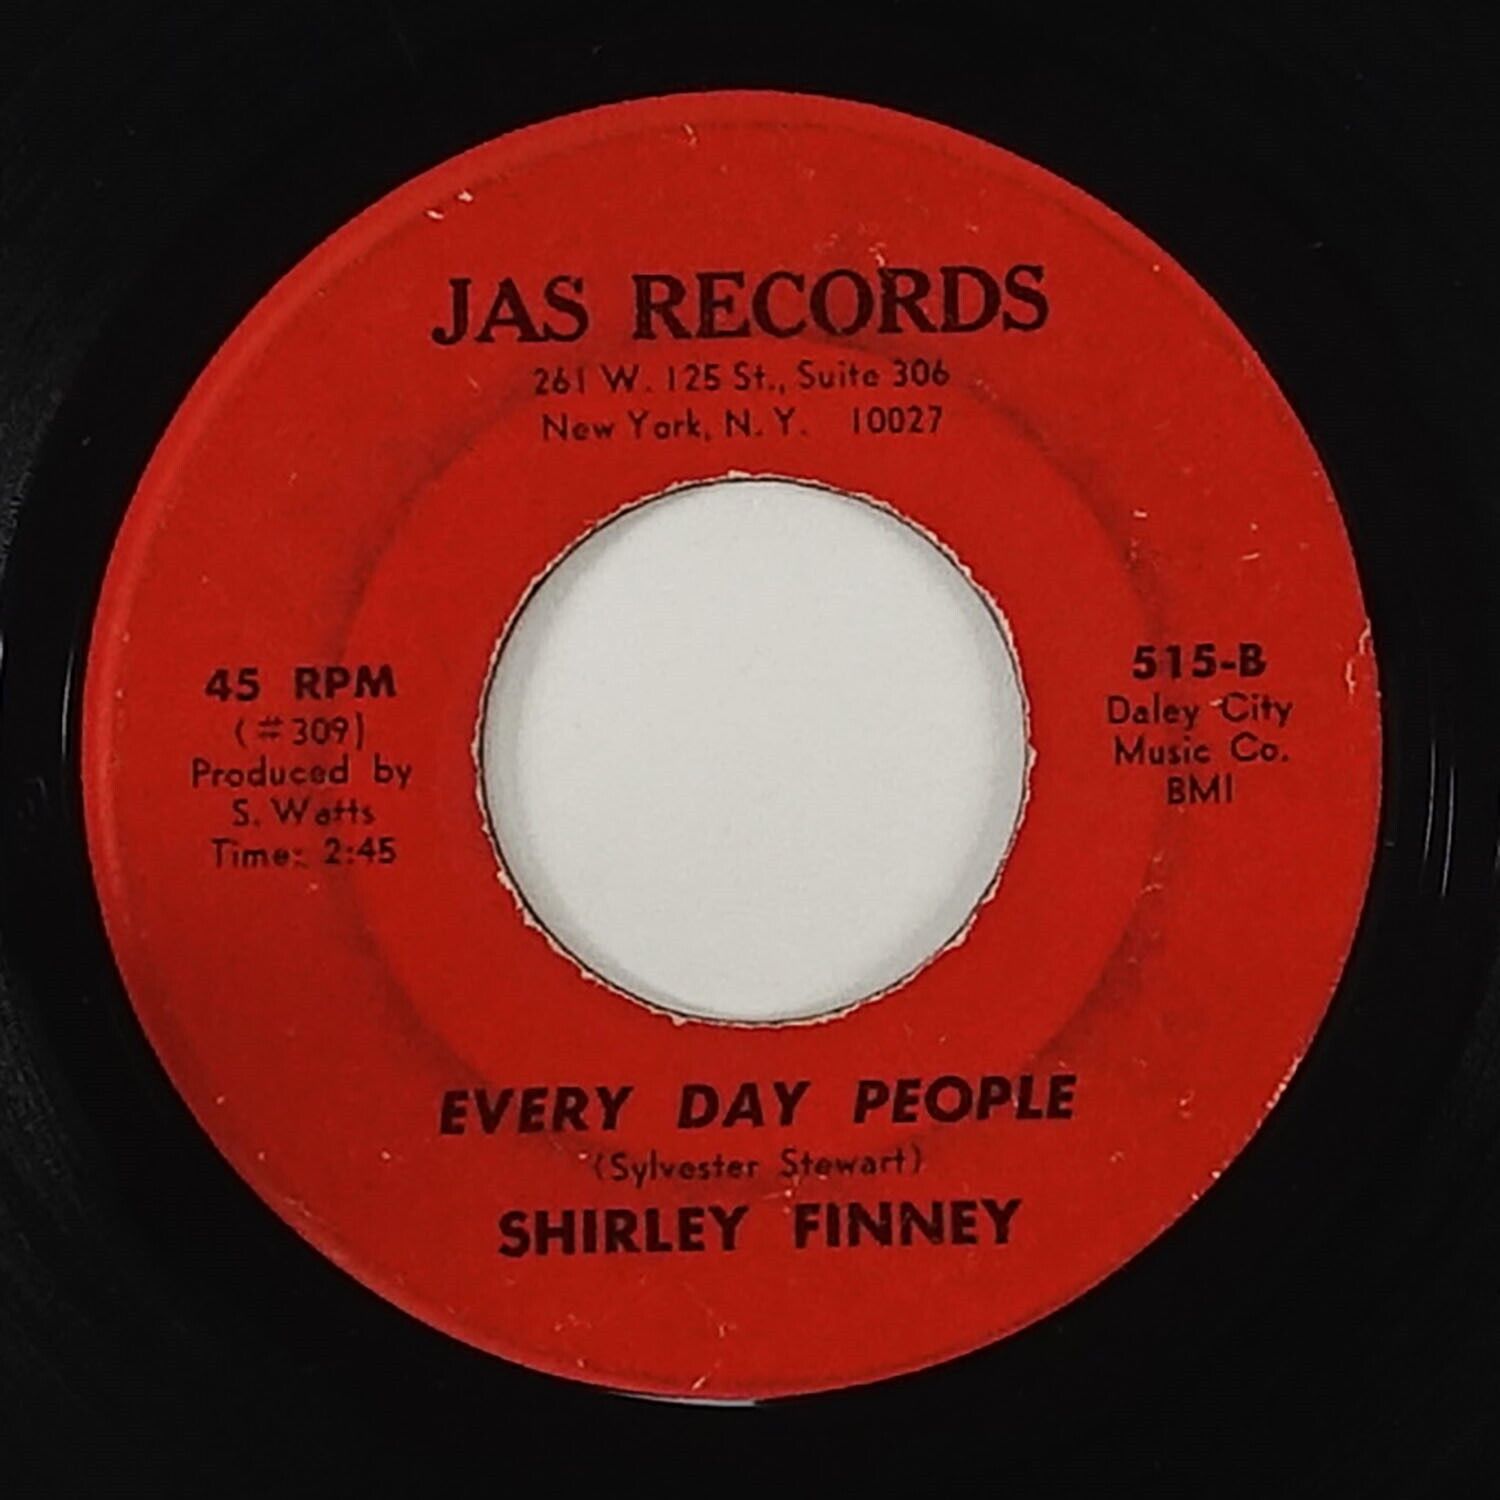 Shirley Finney "Every Day People" Funk 45 JAS HEAR